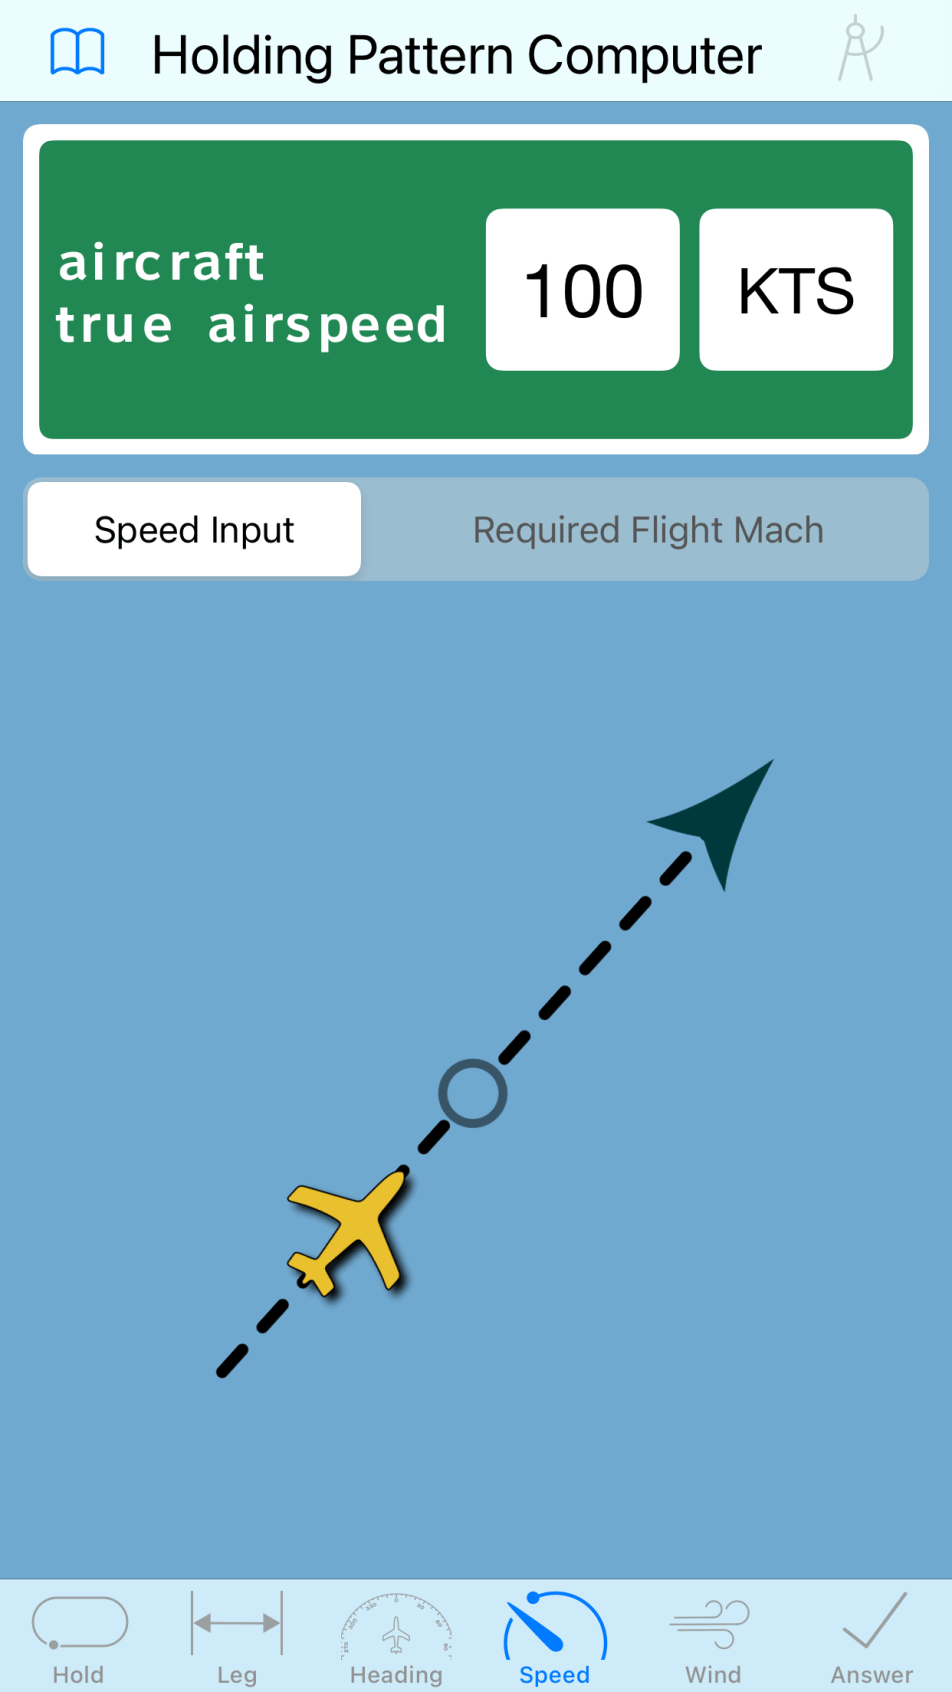 Holding Pattern Computer - Aircraft Airspeed Tab